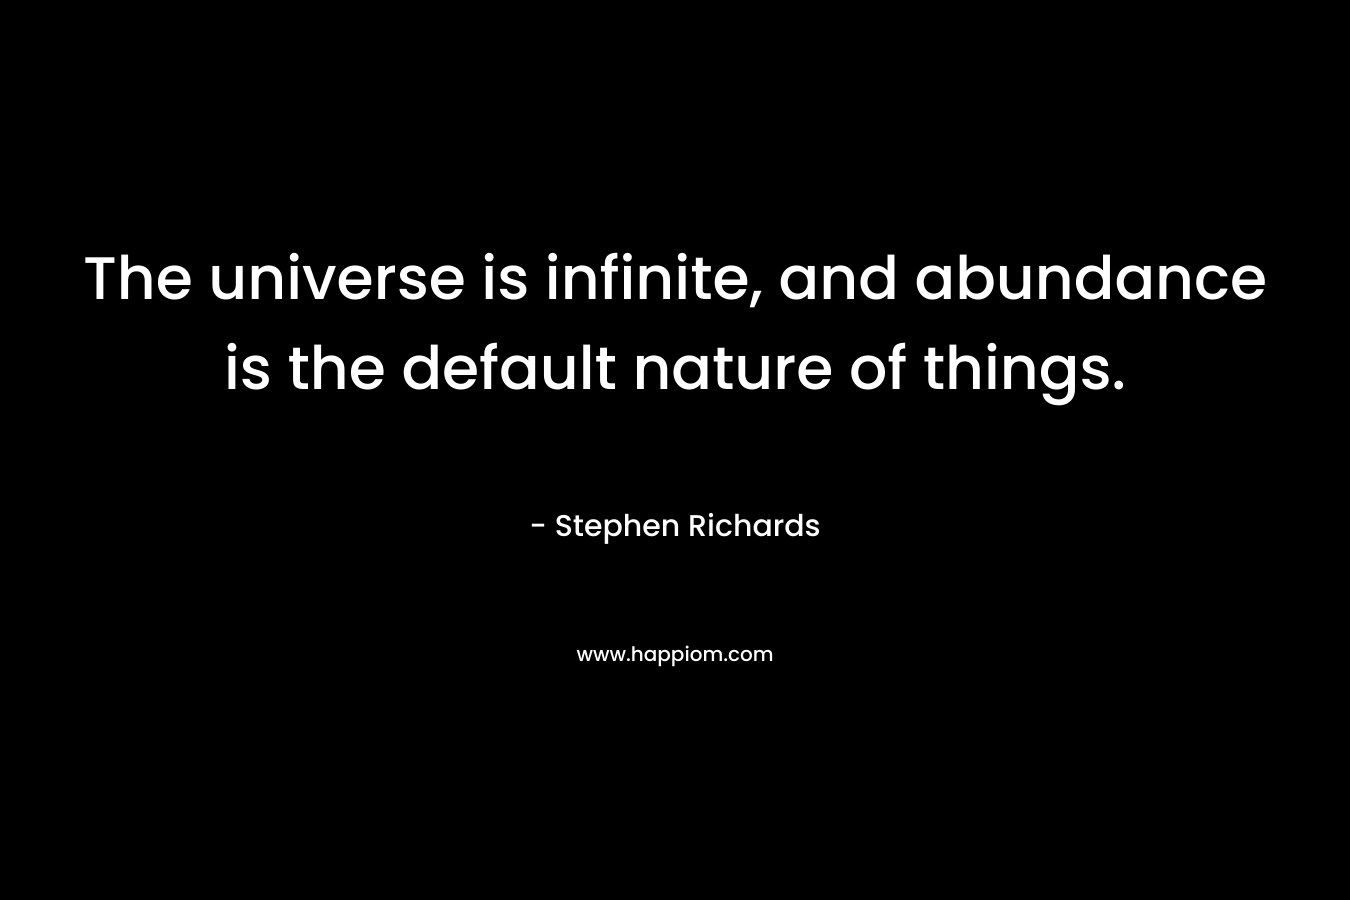 The universe is infinite, and abundance is the default nature of things. – Stephen Richards